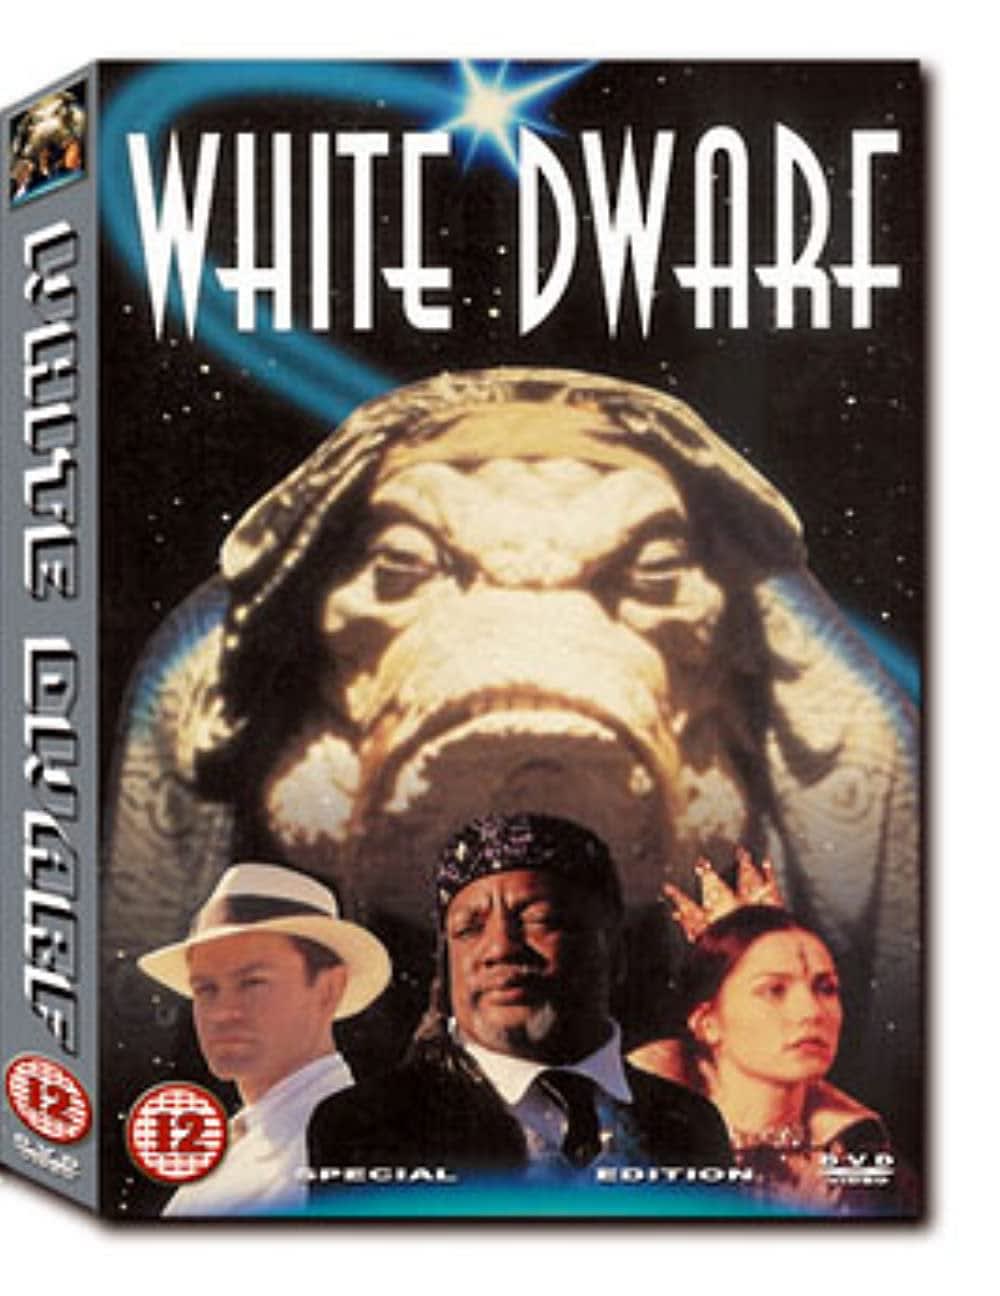 Does anyone else remember the failed TV pilot White Dwarf? I don't know why, but it's been stuck in my memory for 25 years.